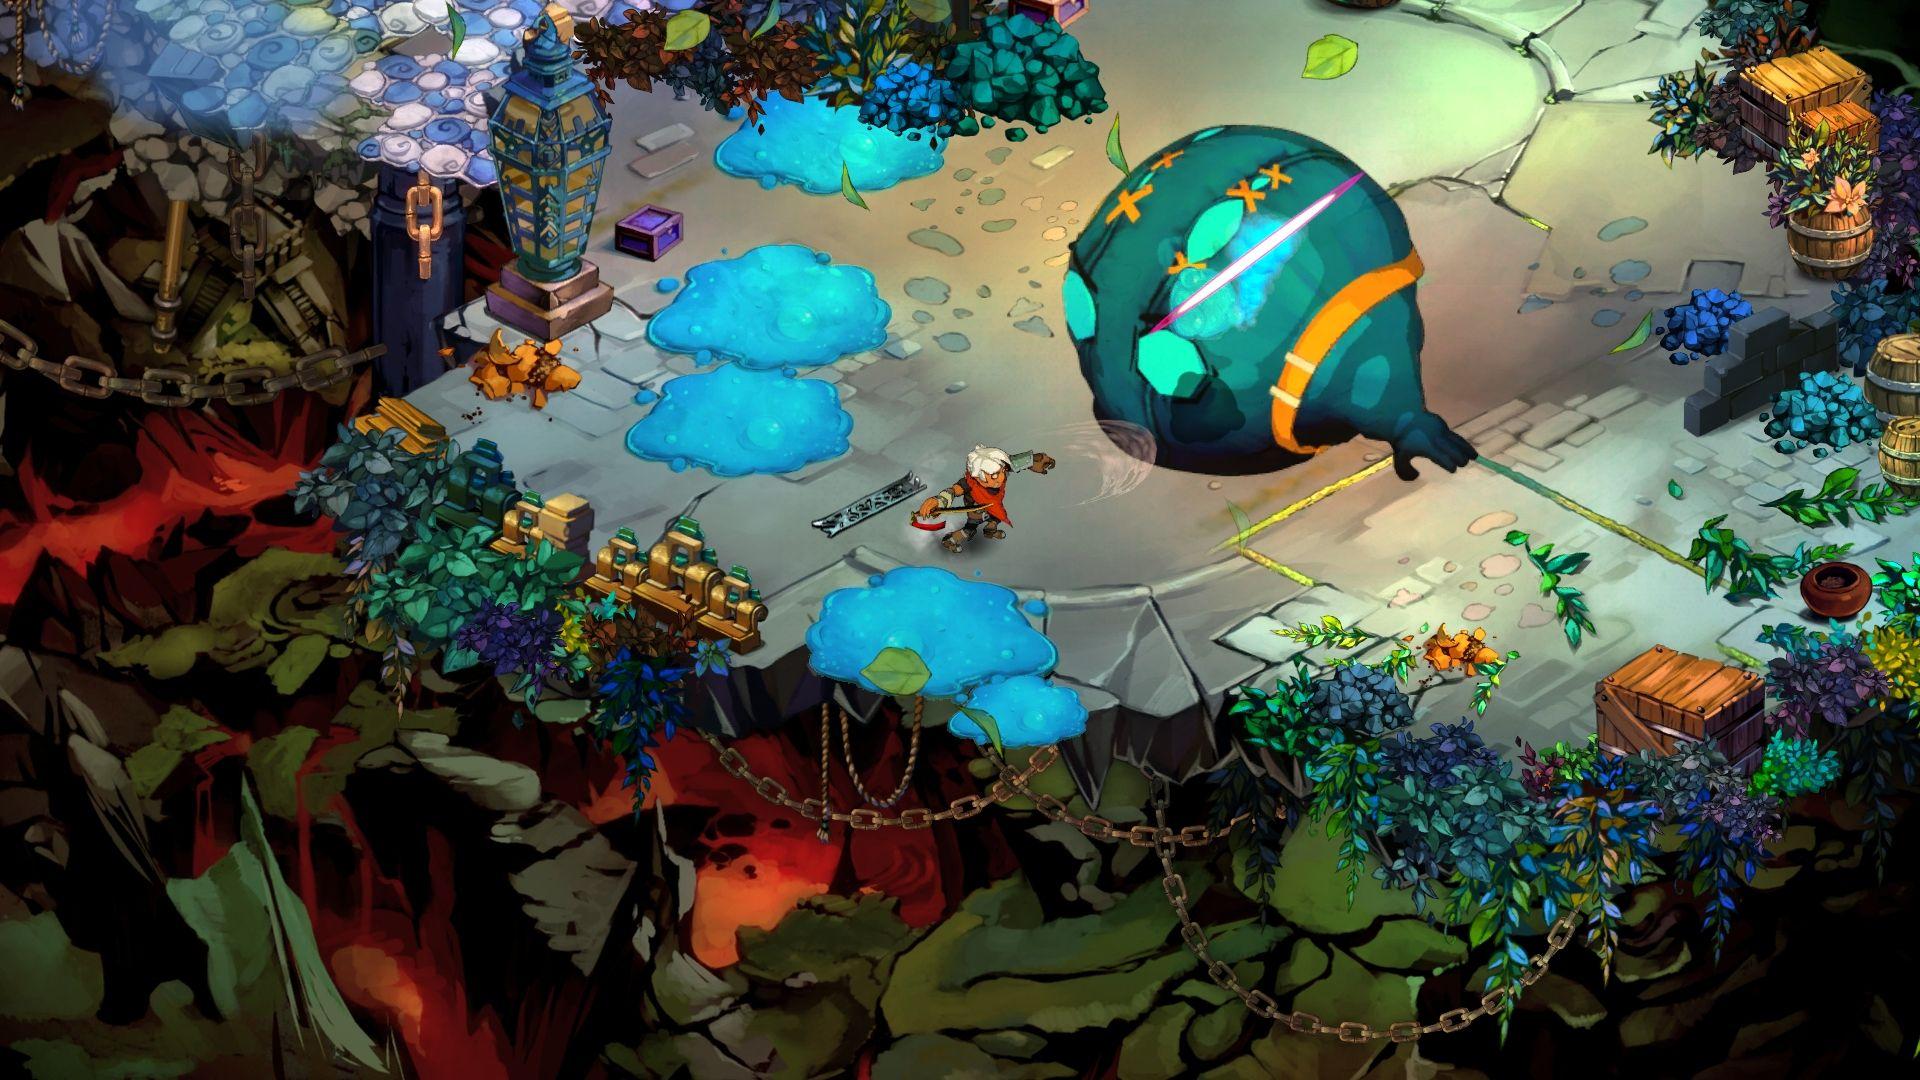 Anesthesie Controle peper Supergiant Games Details Xbox One Release of Bastion | Digital Trends